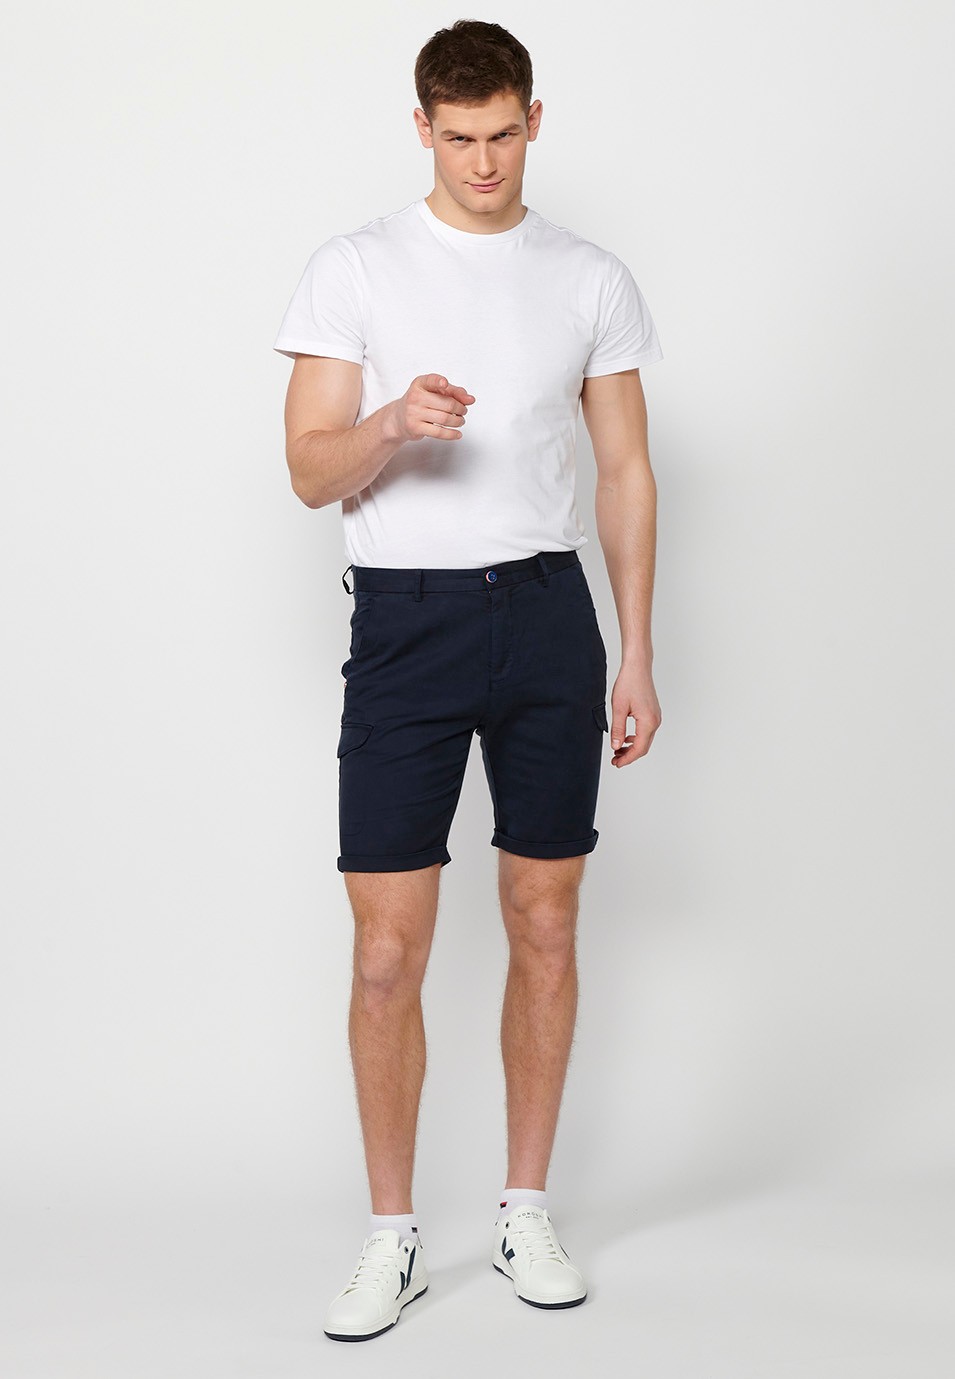 Shorts with rubberized waist and zipper and button closure with pockets, two sides with flap in Navy Color for Men